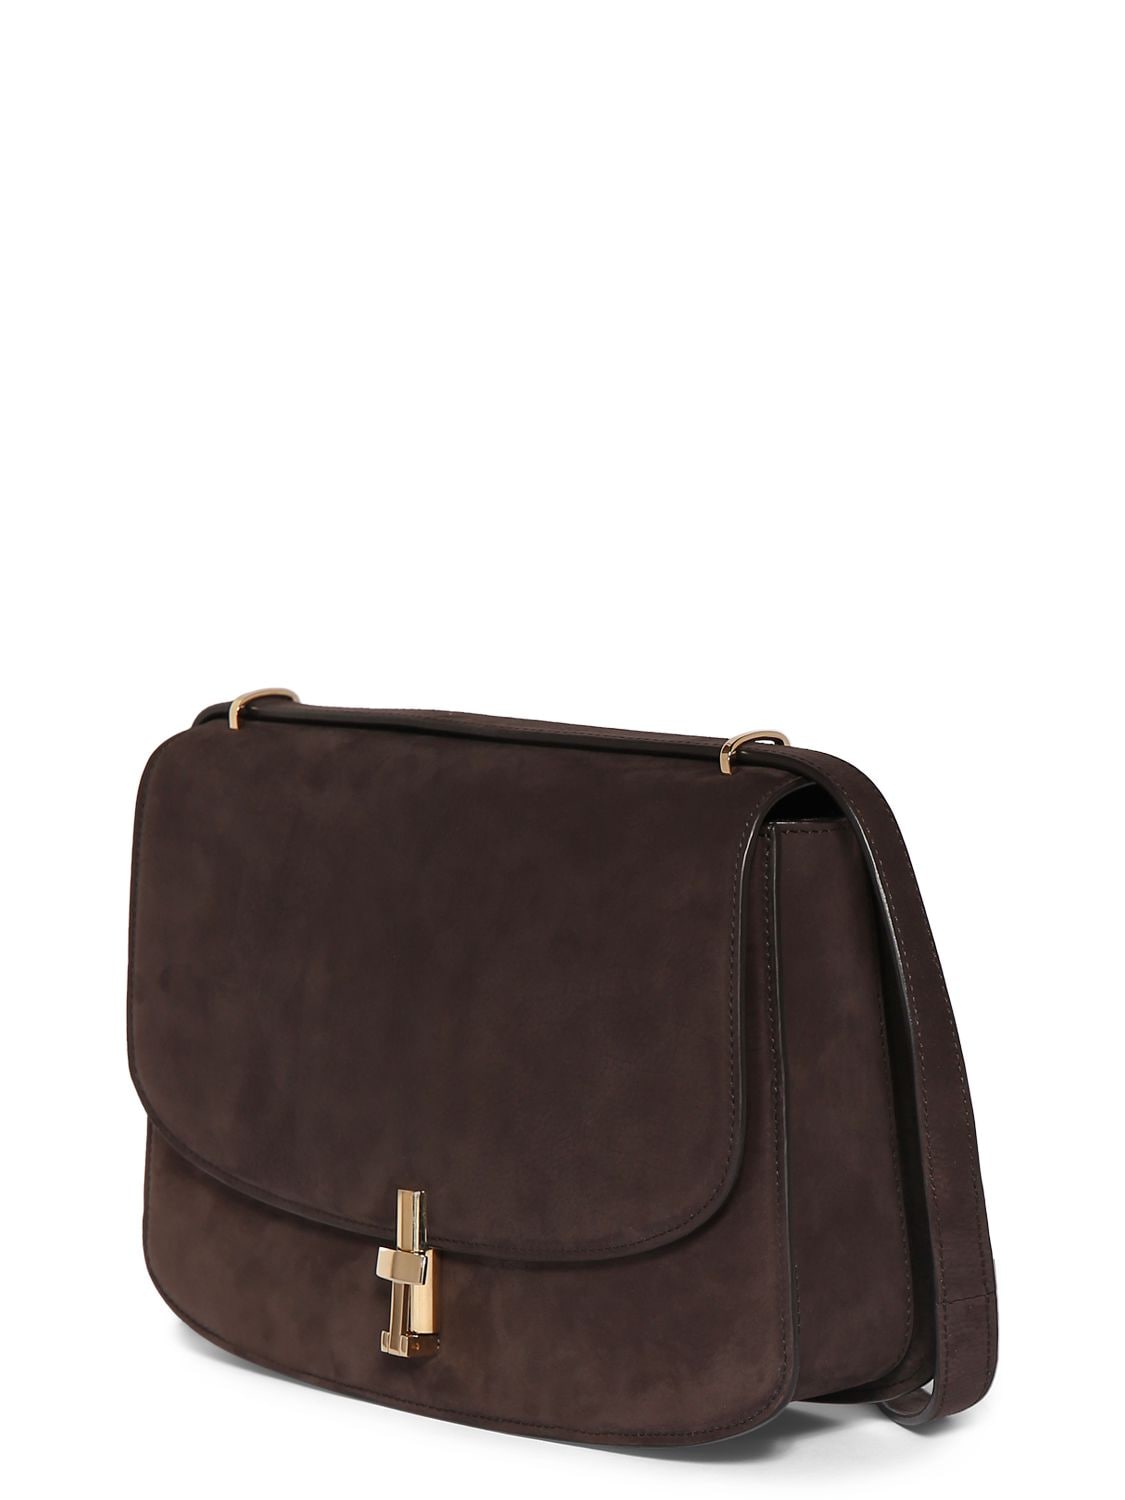 The Row Sofia 10 Suede Shoulder Bag In Wood Brown Lg